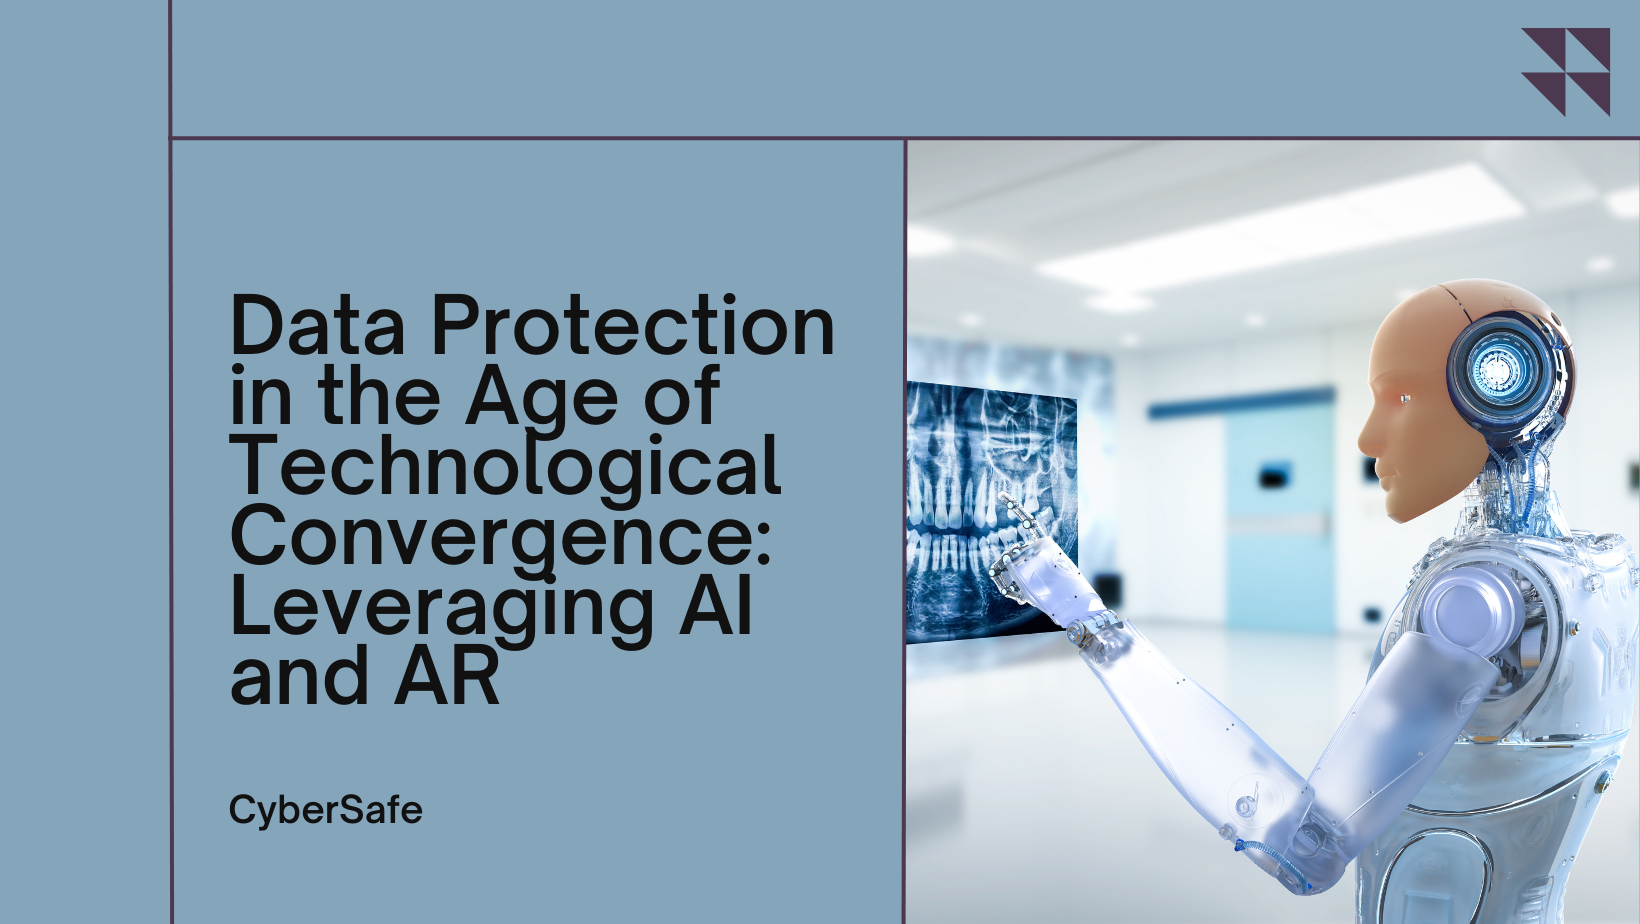 Data Protection in the Age of Technological Convergence: Leveraging AI and AR